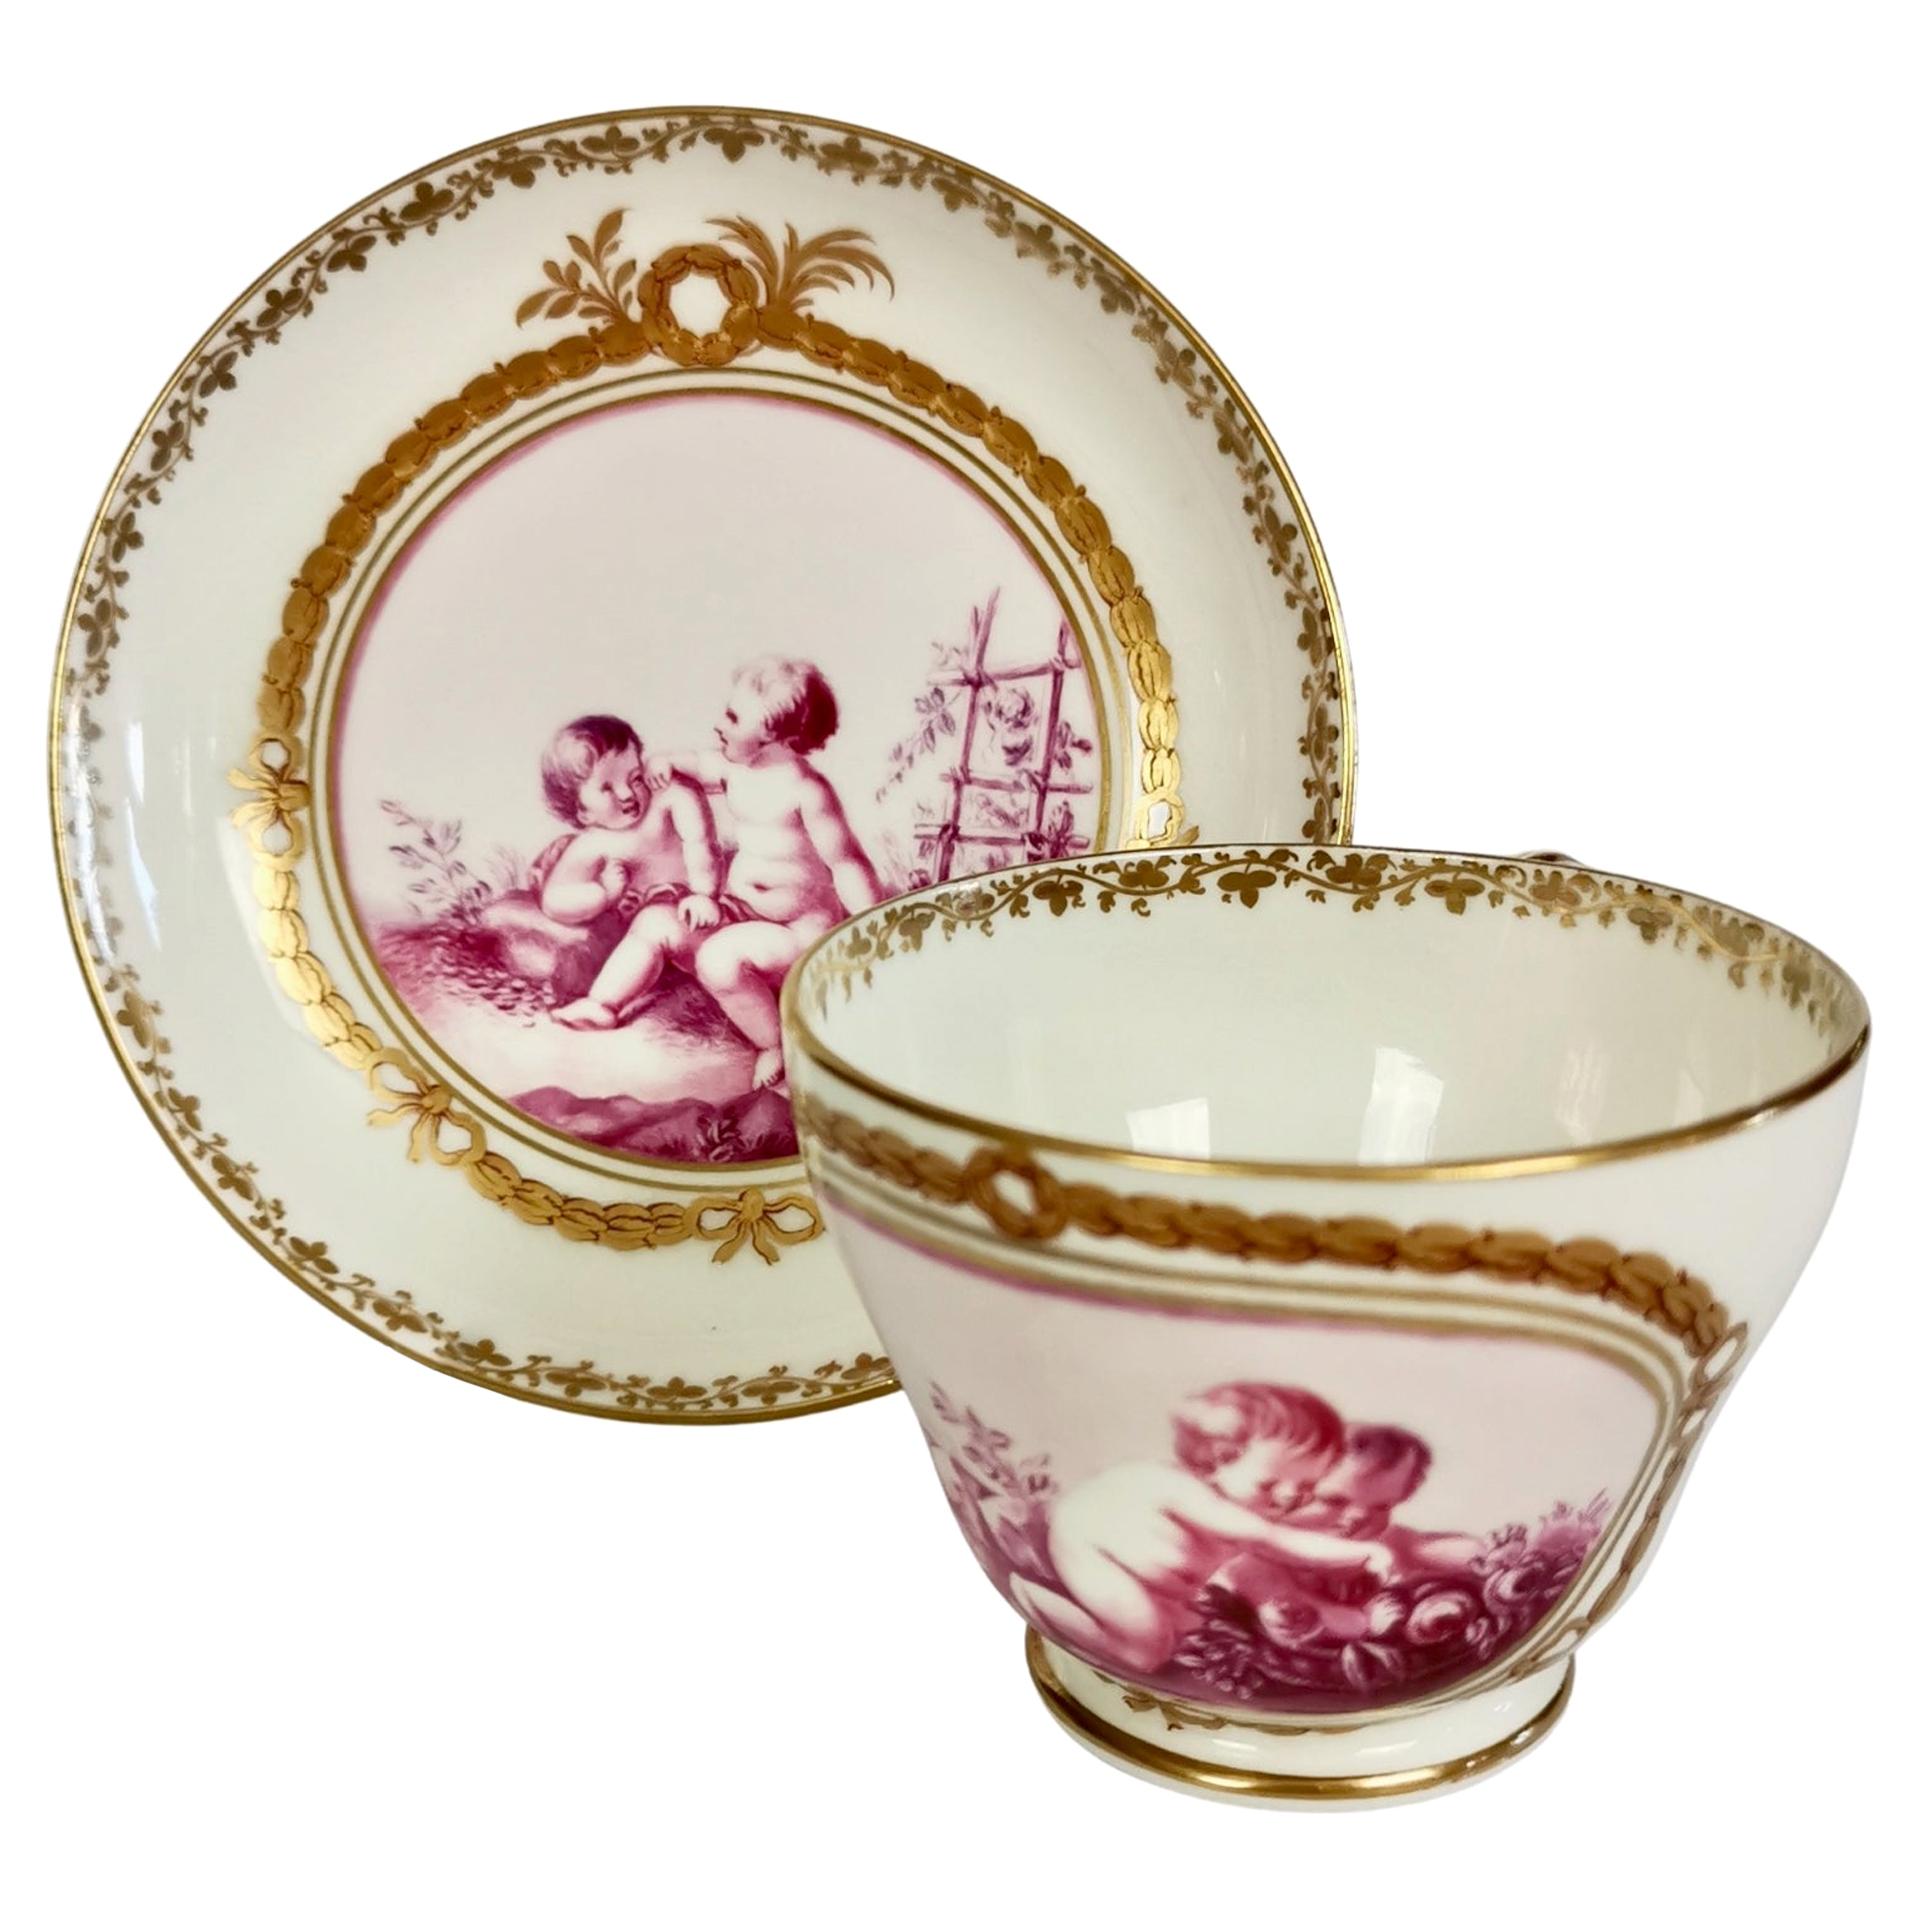 Kerr & Binns Worcester Porcelain Cup and Saucer, Puce Putti Playing, circa 1855